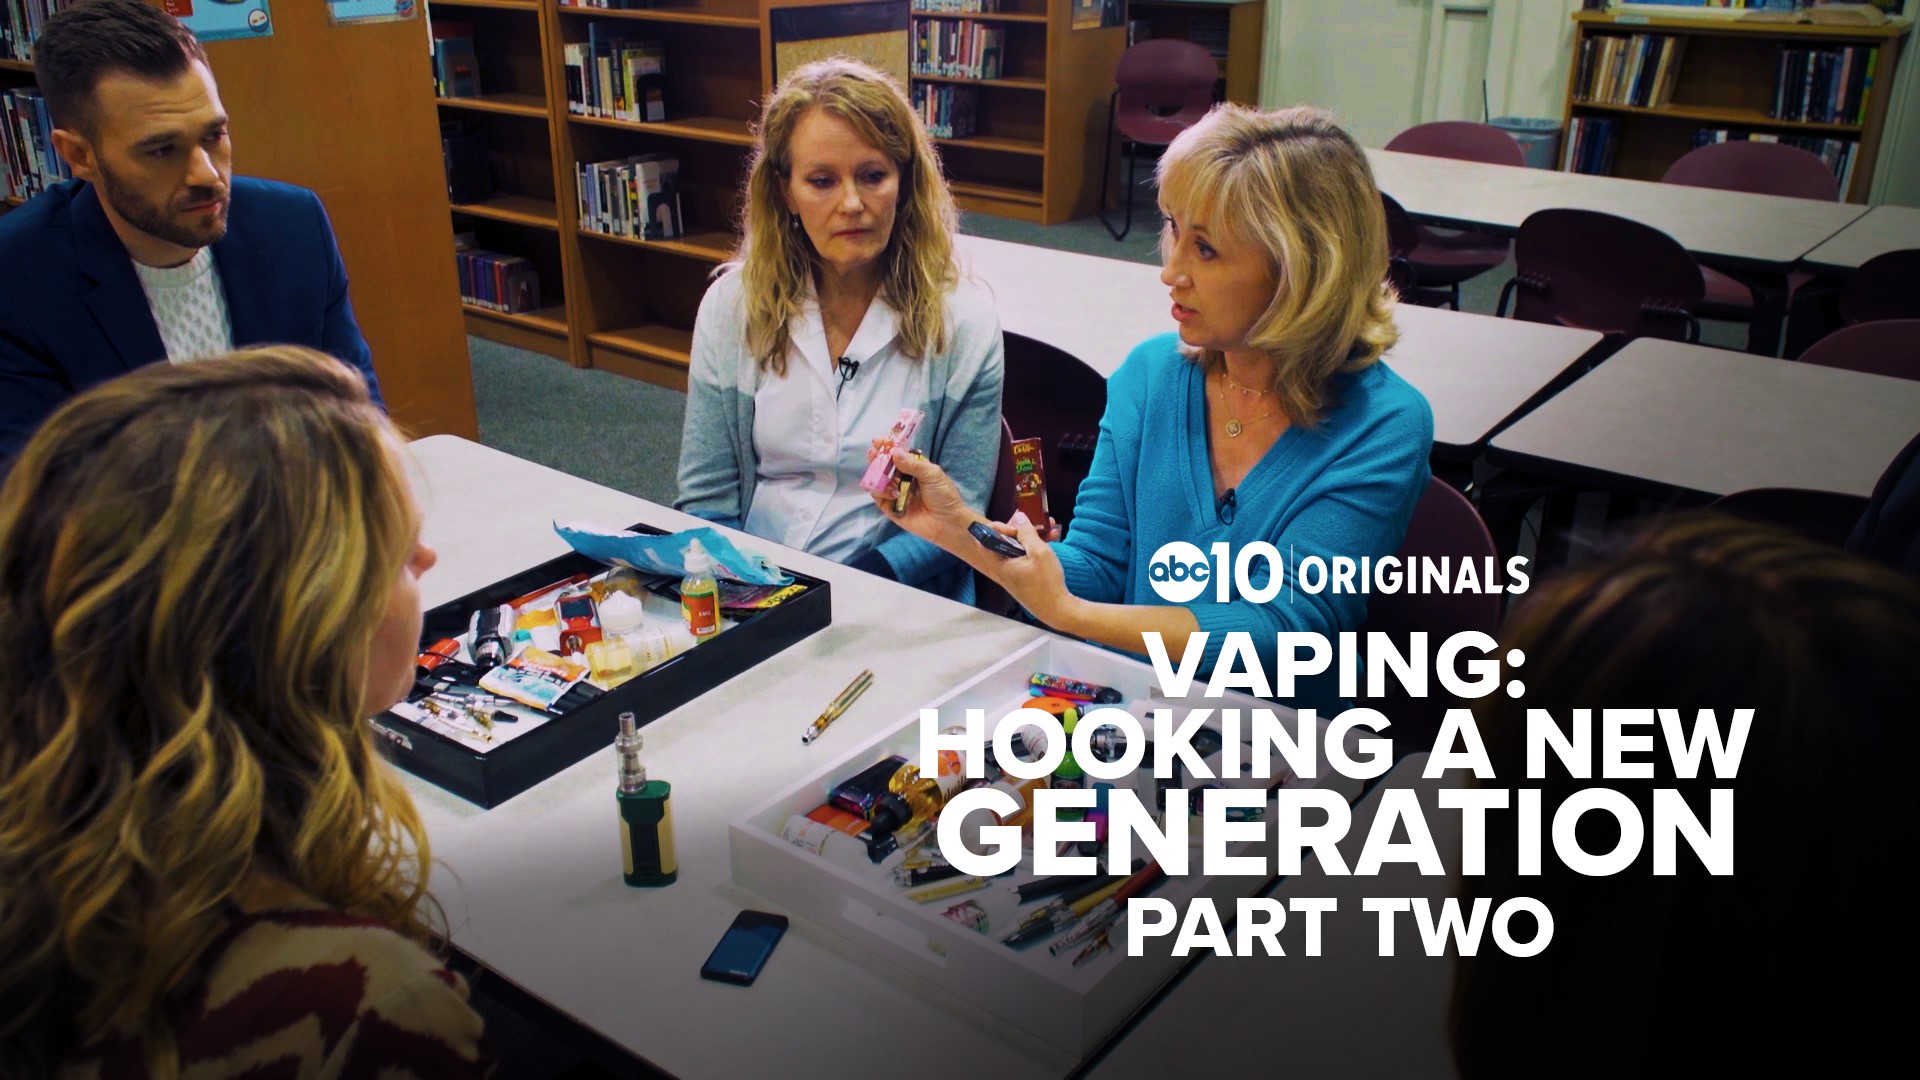 Parents and teachers work to disseminate information to try to curb the vaping epidemic in Sacramento schools.